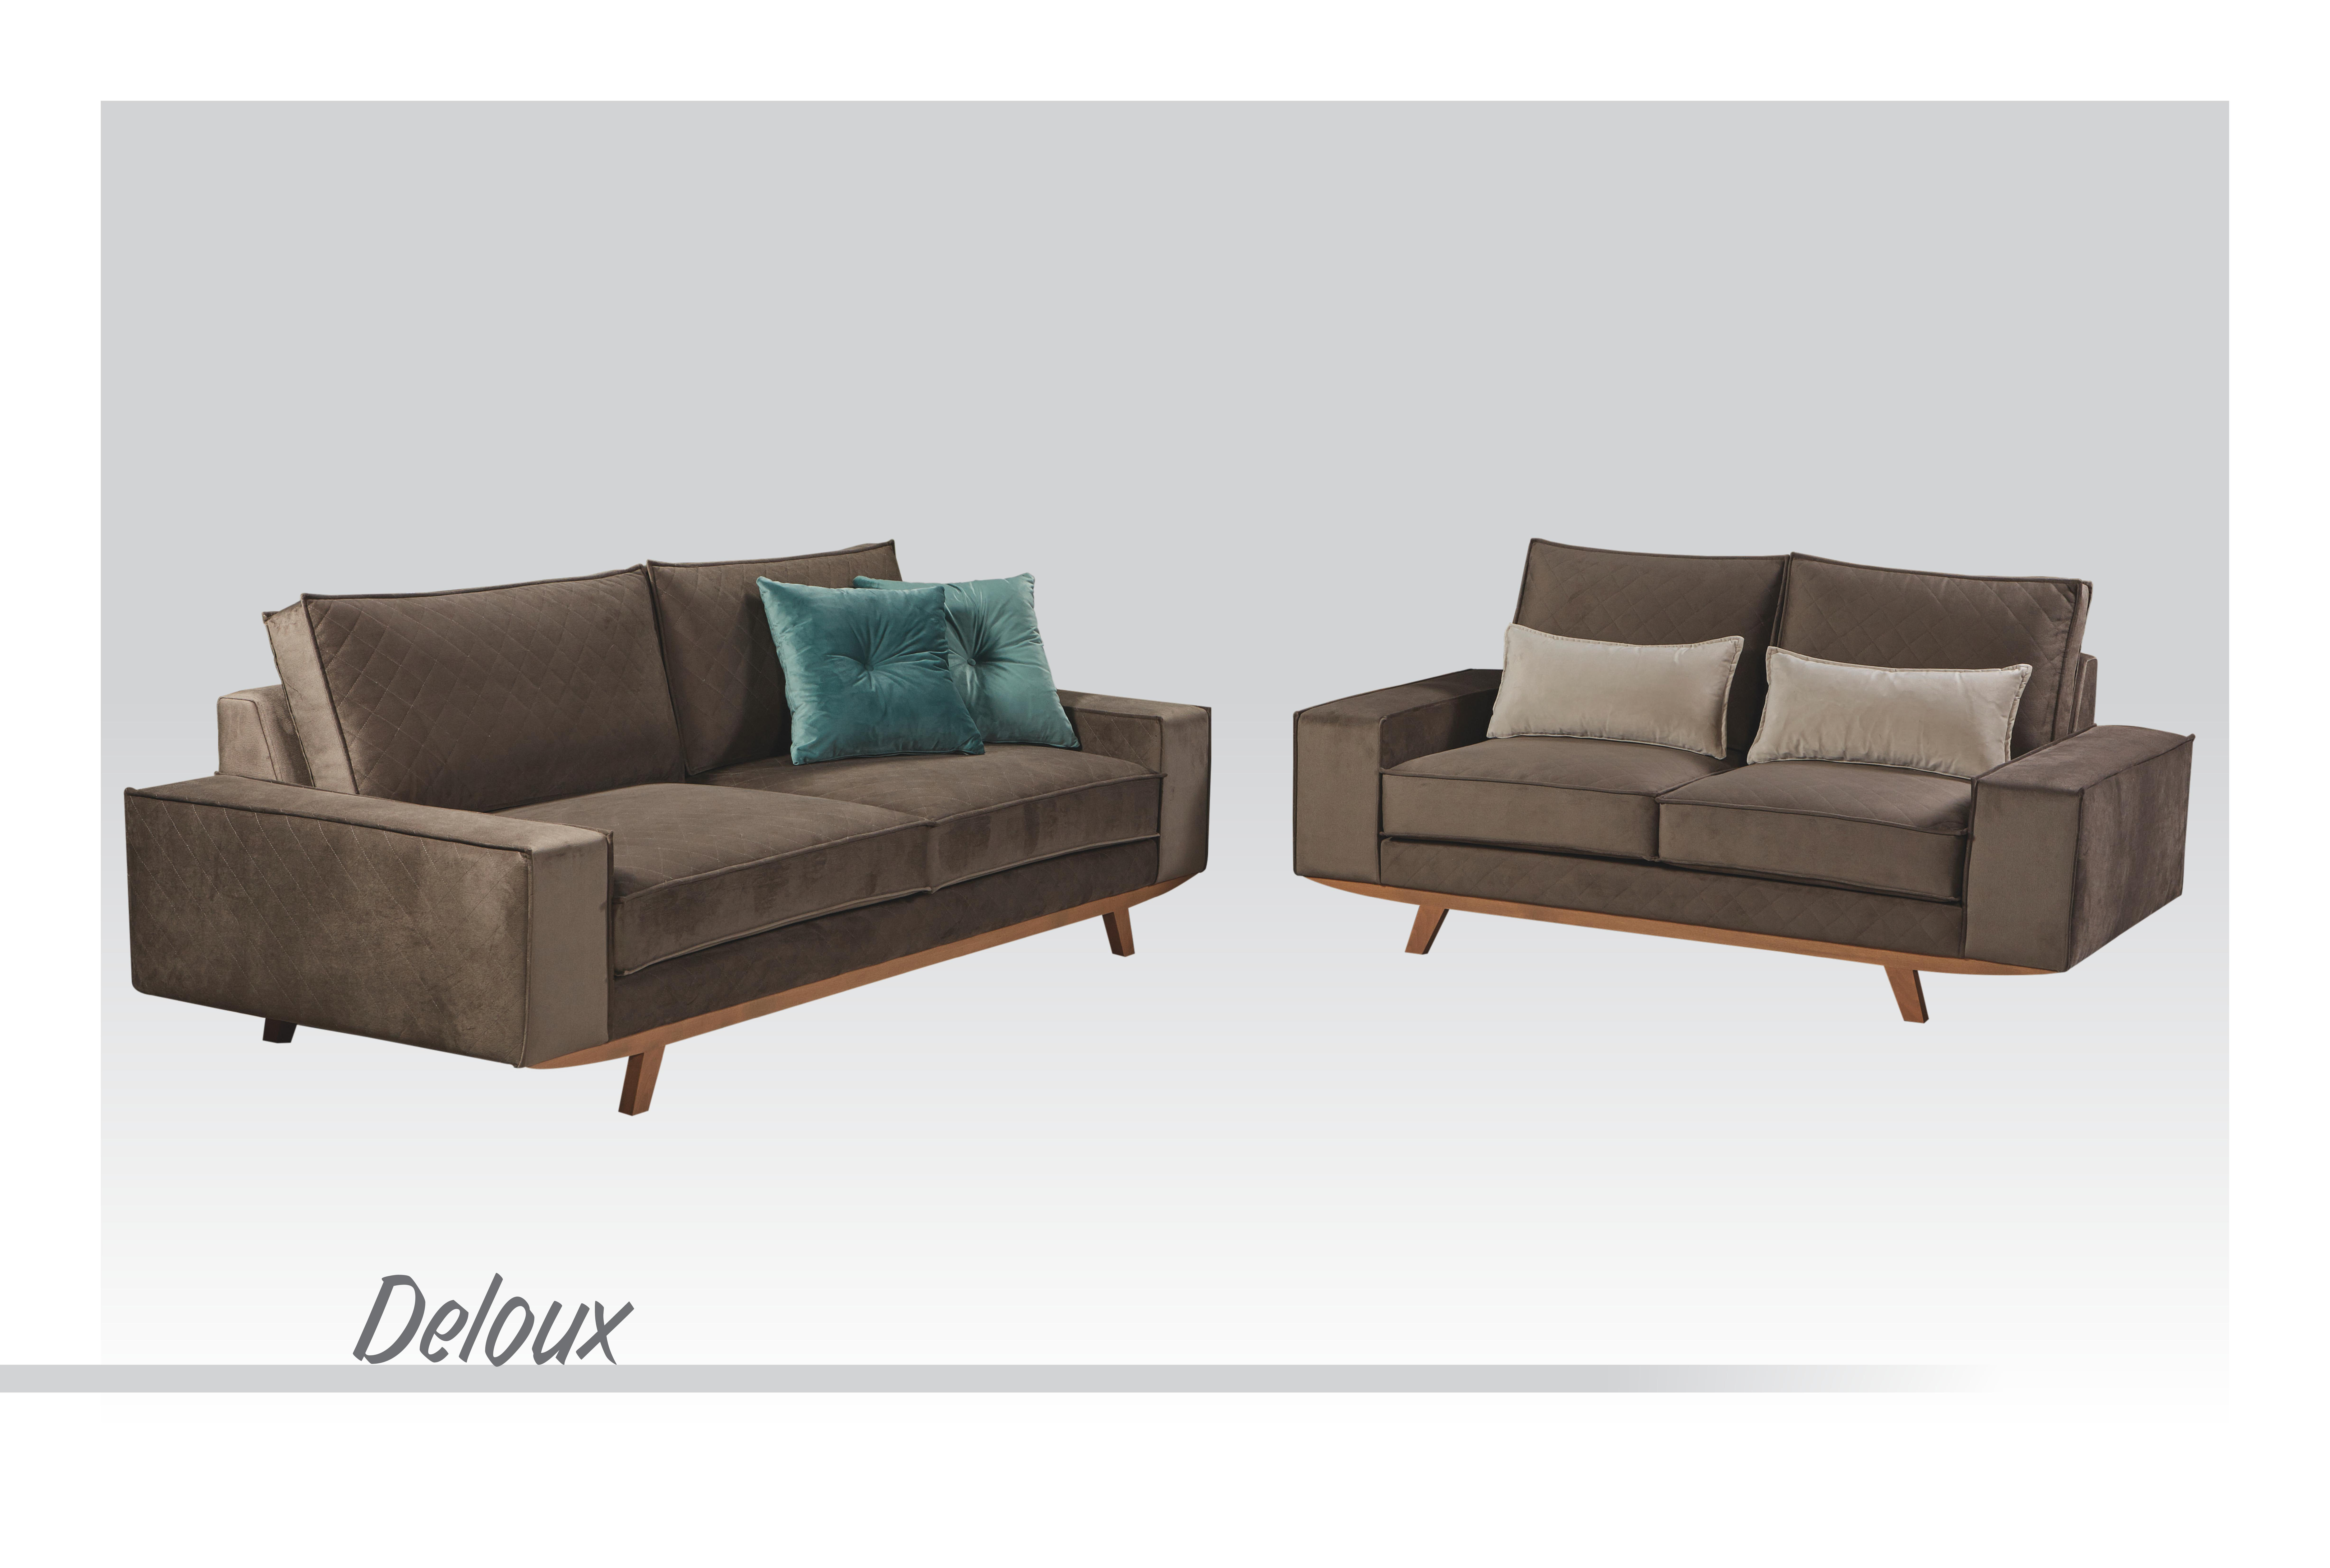 3-seated & 2-seated sofas "Deloux"